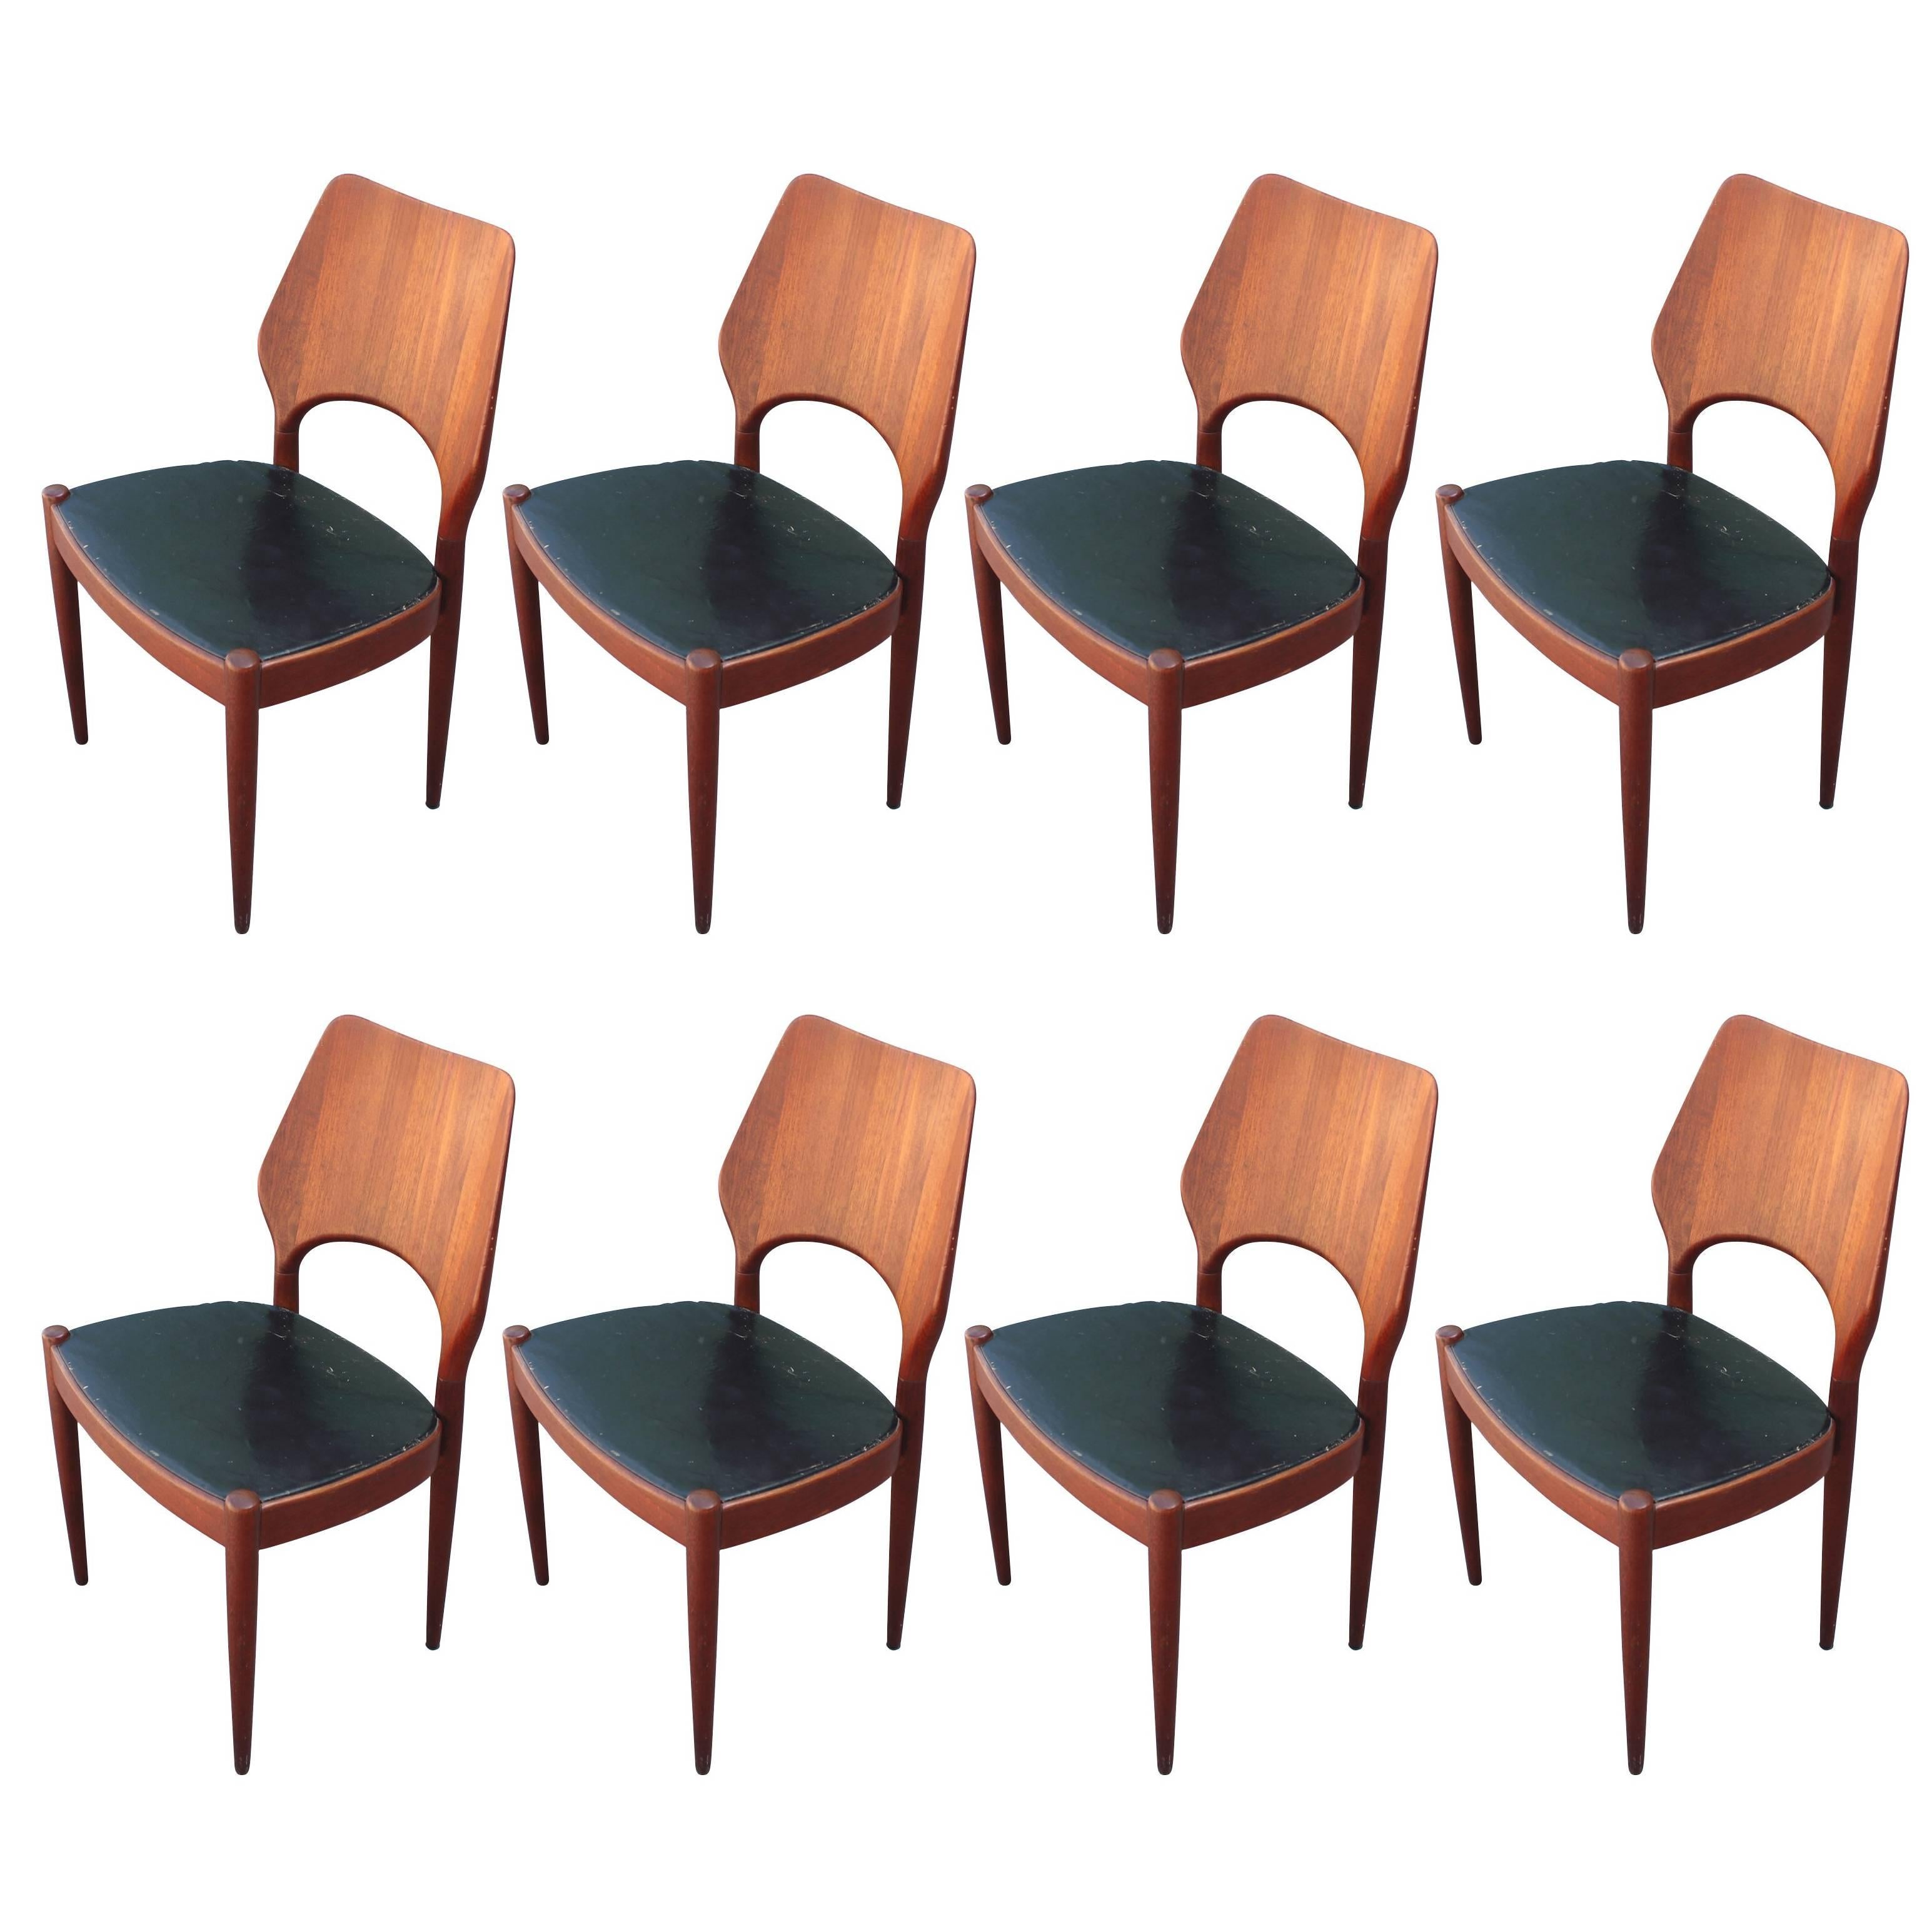 Set of Eight Modern Danish Chairs with Black Leather Seats